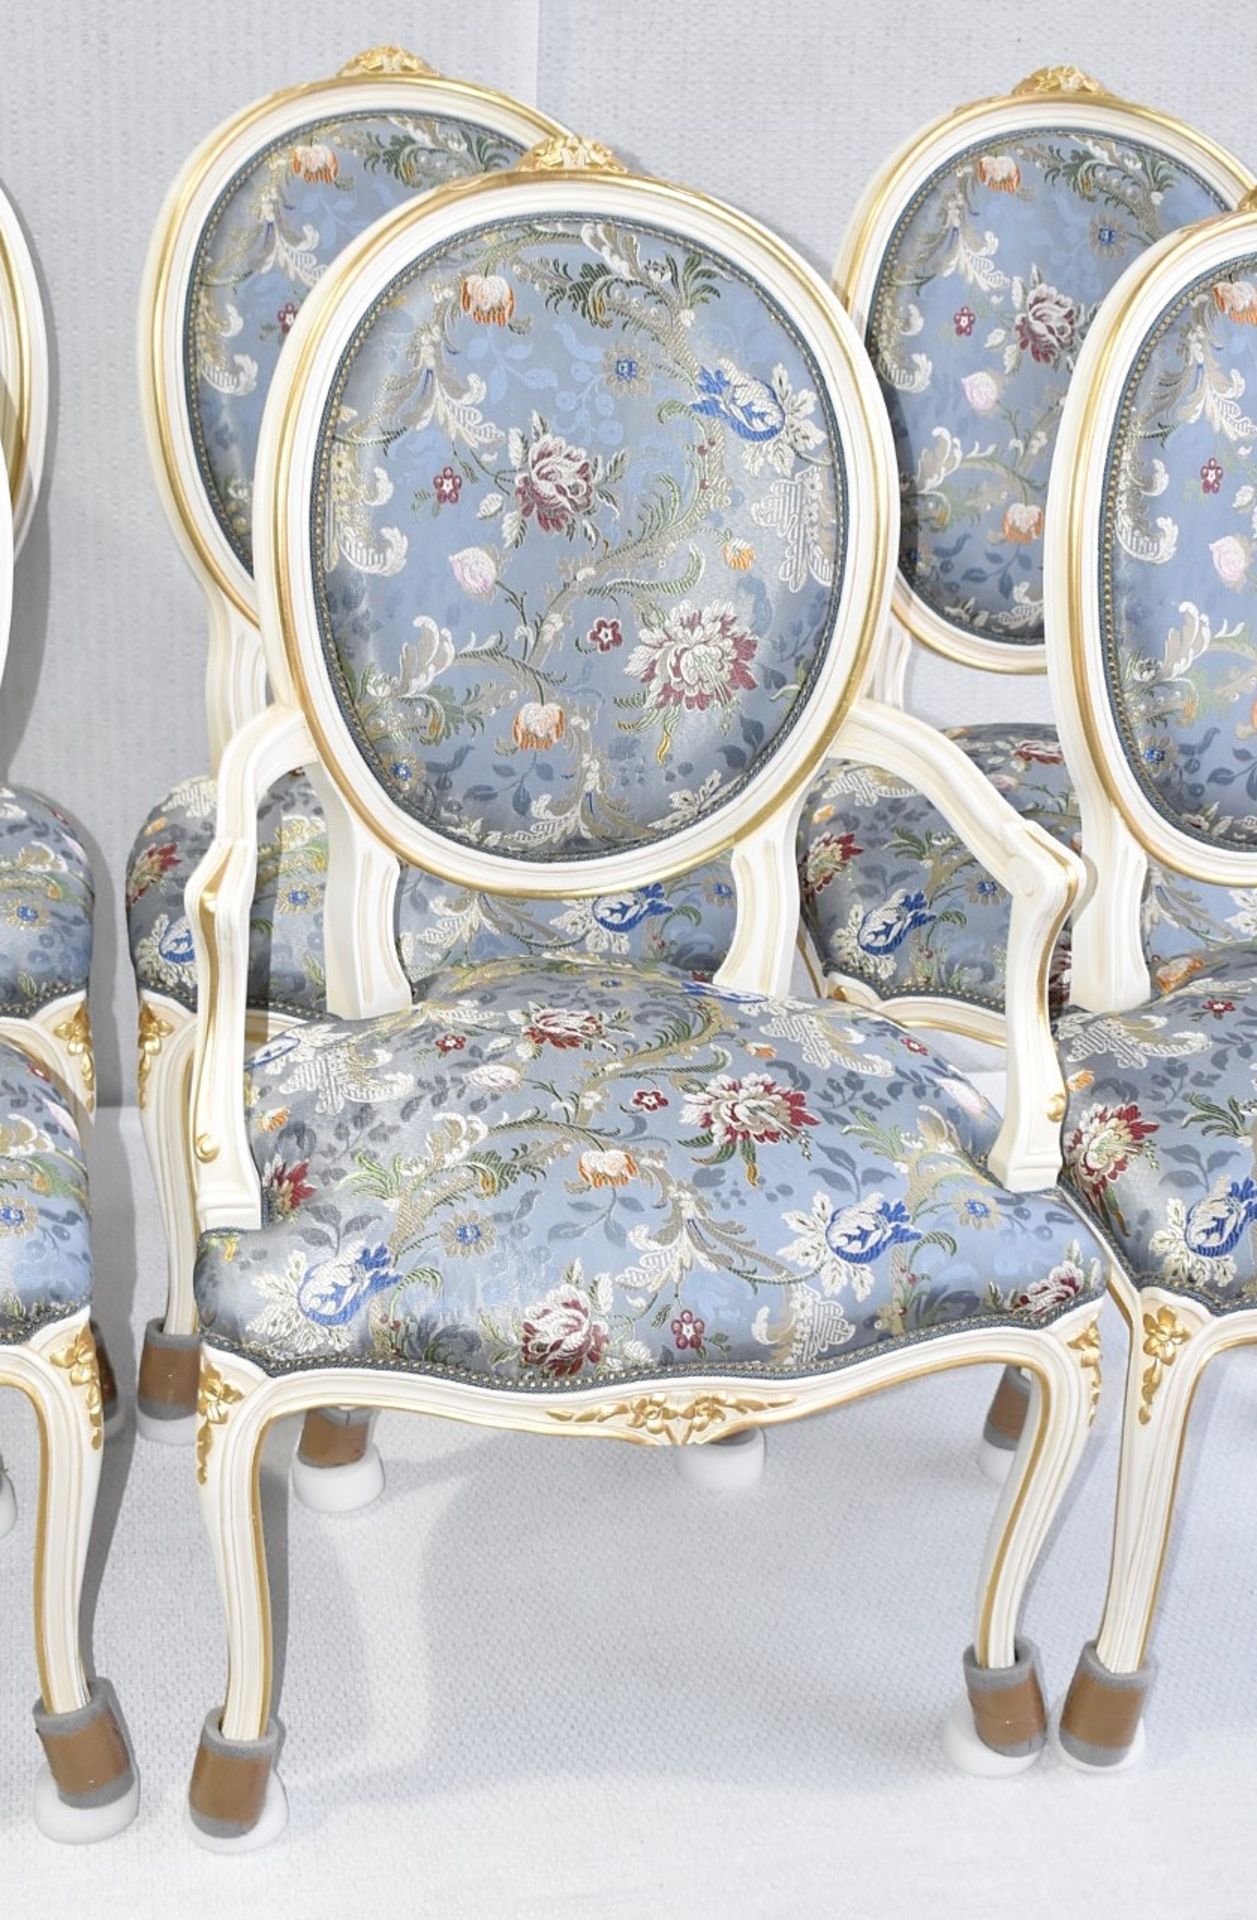 Set of 6 x ANGELO CAPPELLINI 'Timeless' Baroque-style Carved Dining Chairs, Floral Upholstered - Image 7 of 14